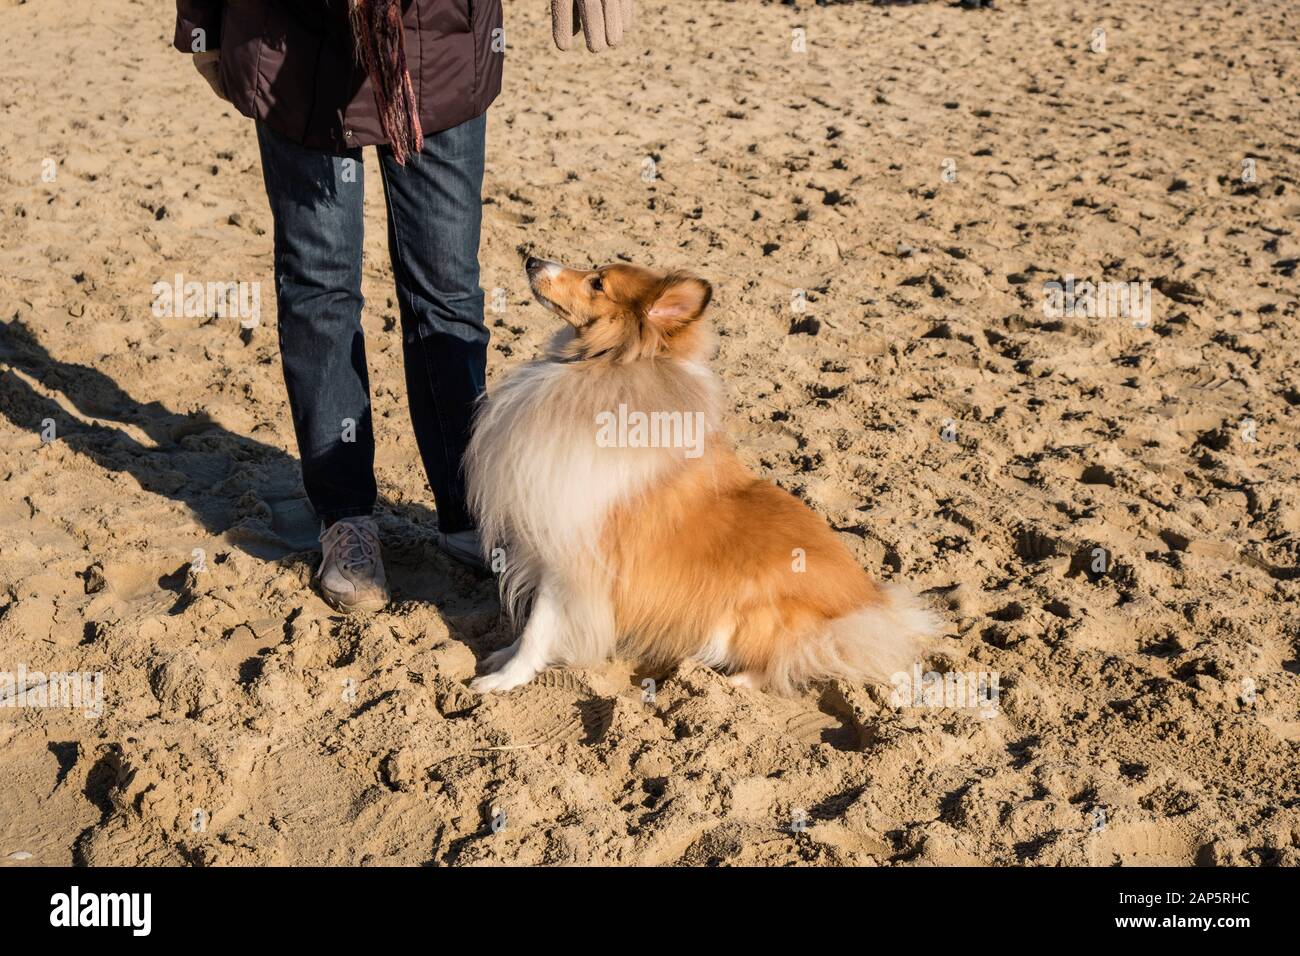 Shetland Sheepdog, sometimes known as a Sheltie, on a beach with his owner. Stock Photo